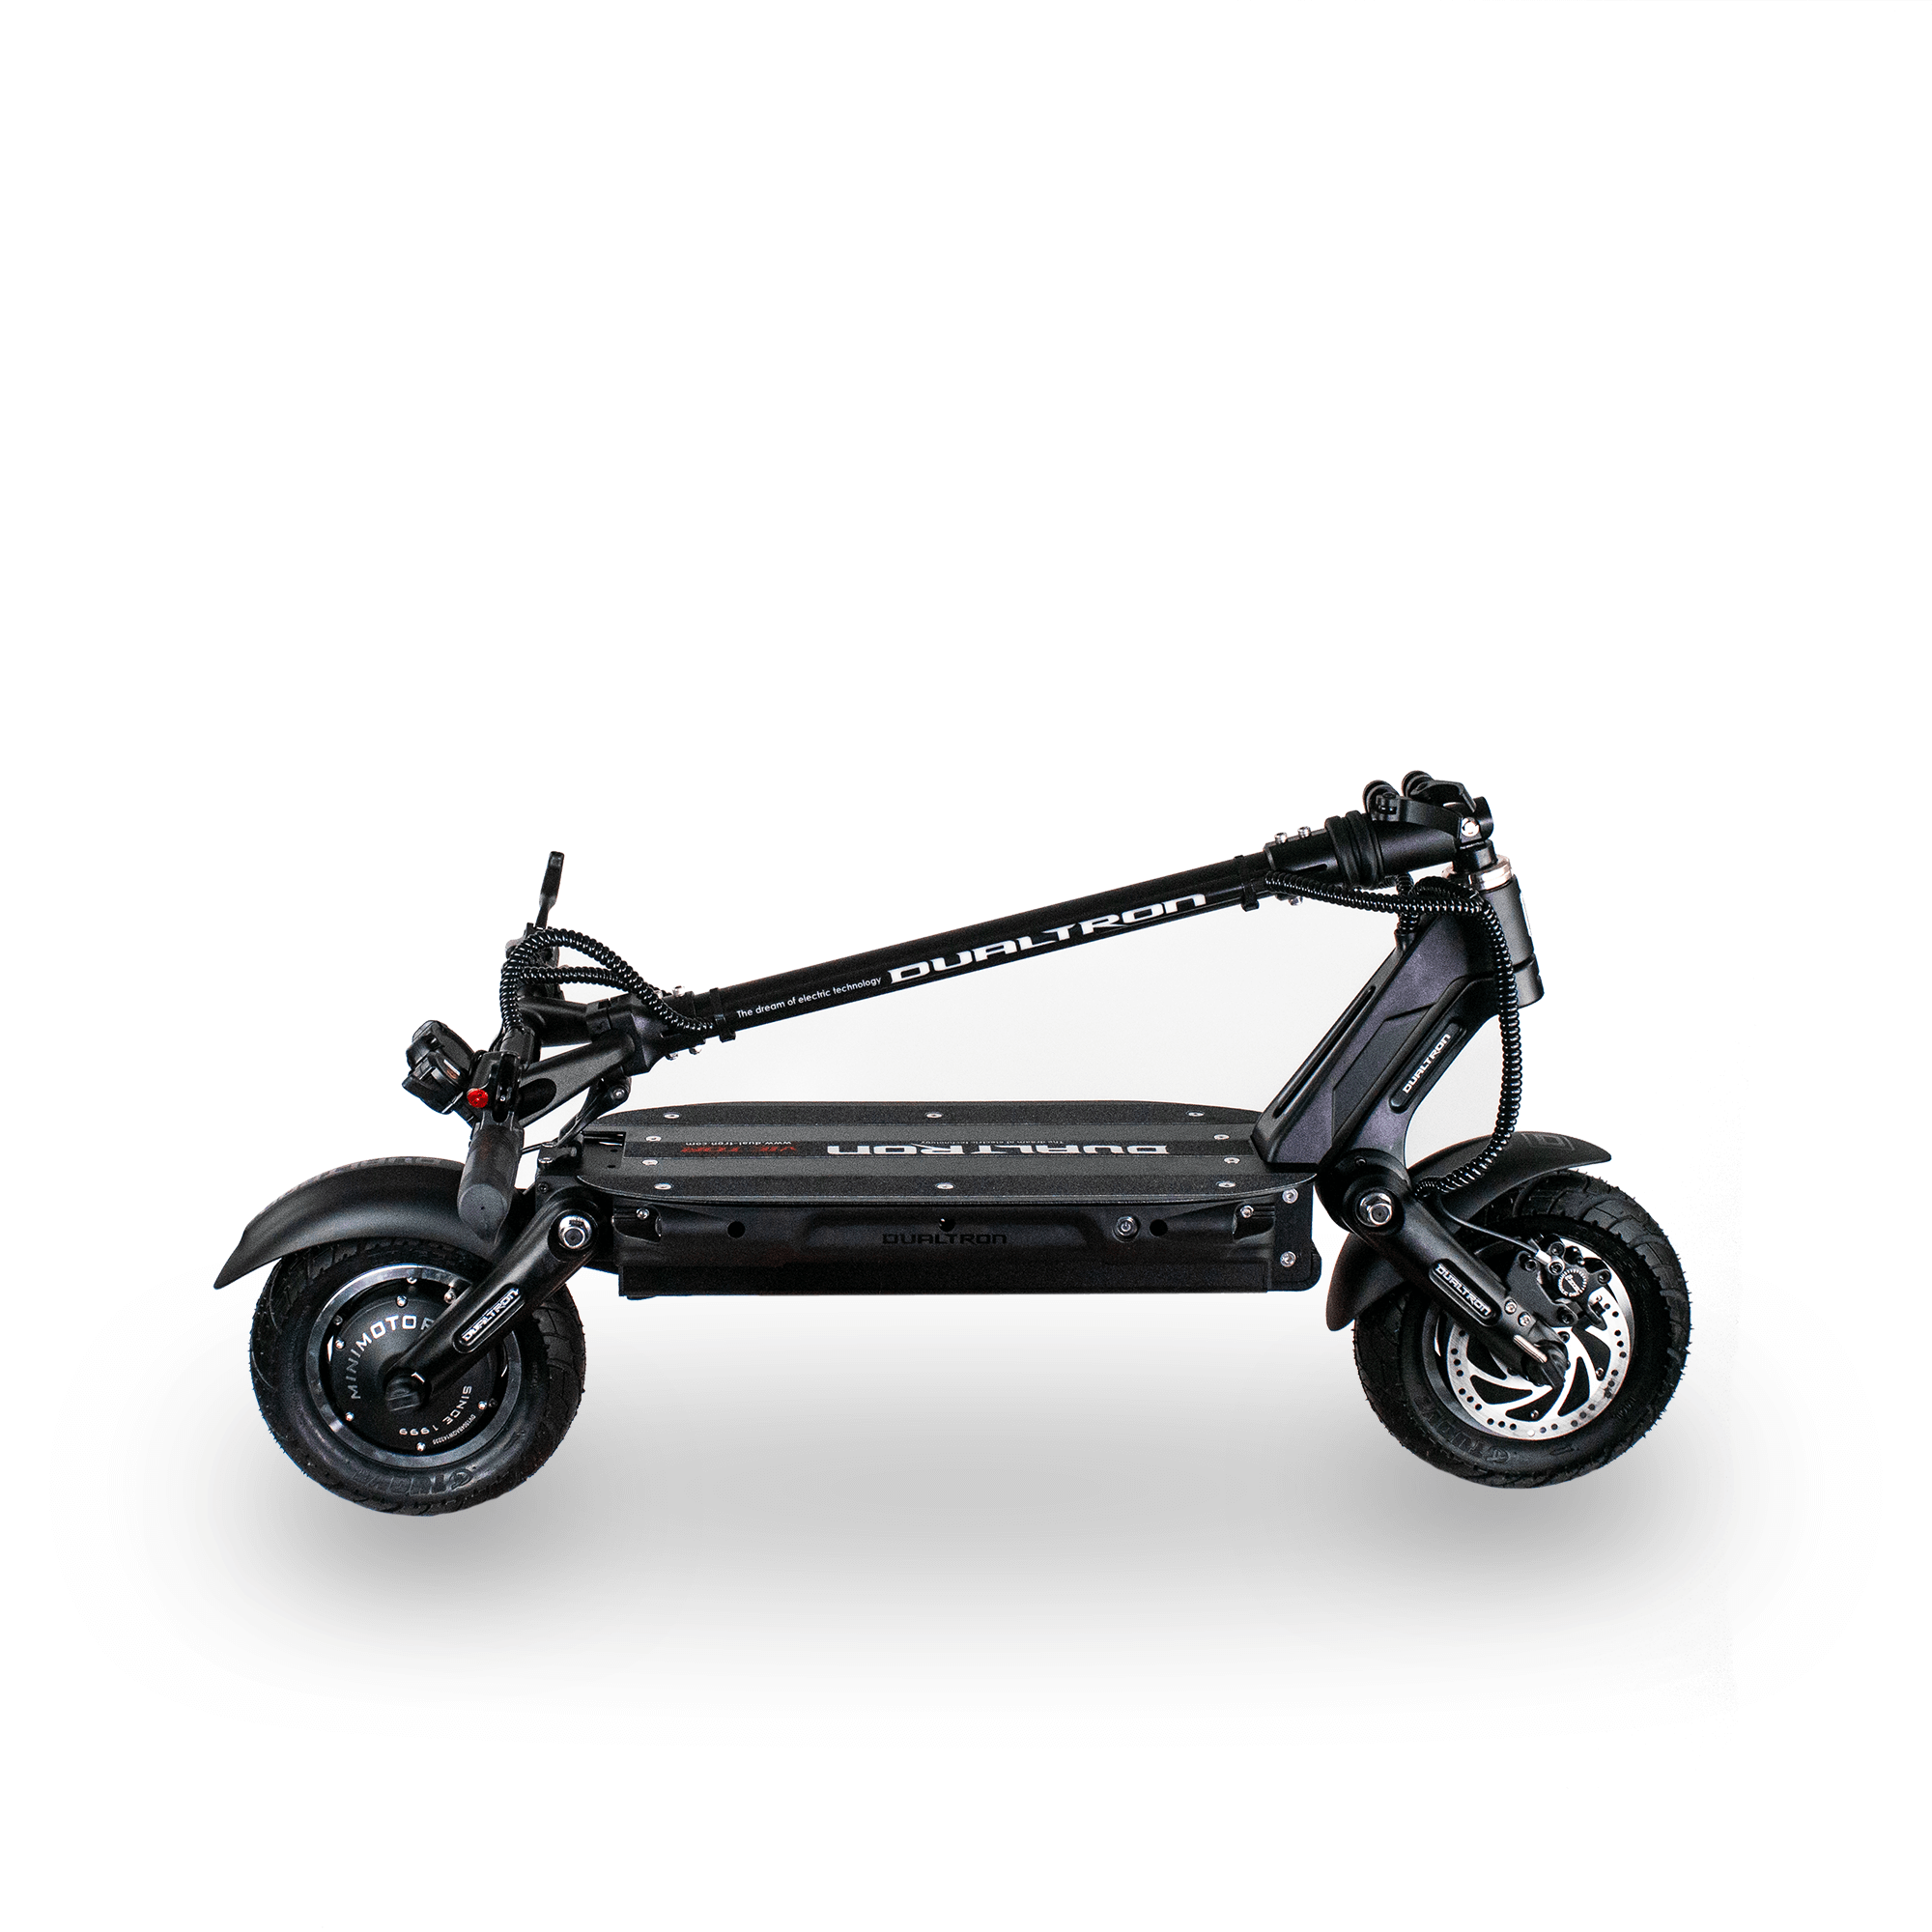 Refurbished Dualtron Ultra 2 Electric Scooter - VORO MOTORS